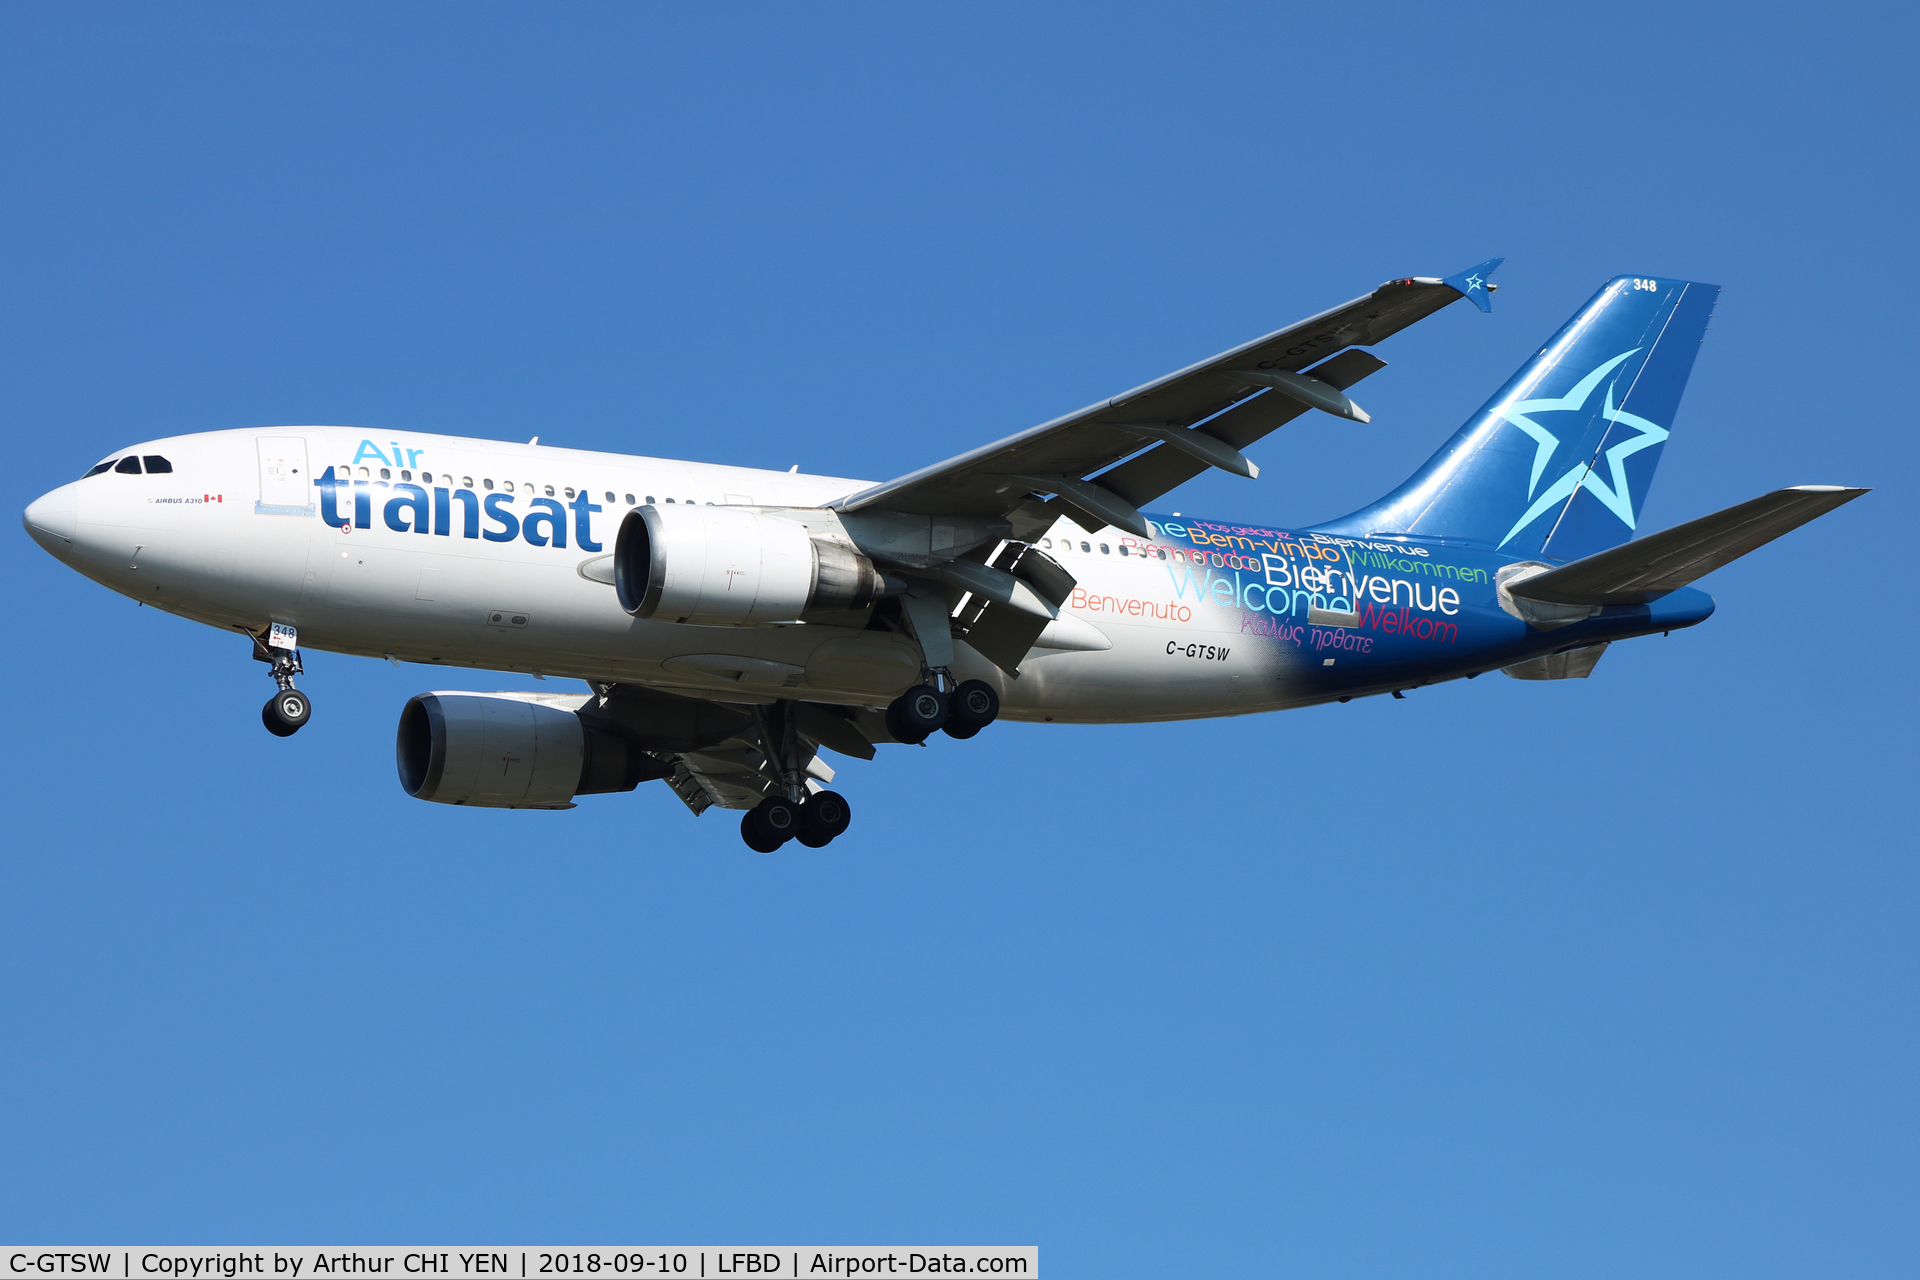 C-GTSW, 1988 Airbus A310-304 C/N 483, Air Transat A310.

Fun fact, I flew in this aircraft in 2013 CDG-YUL.